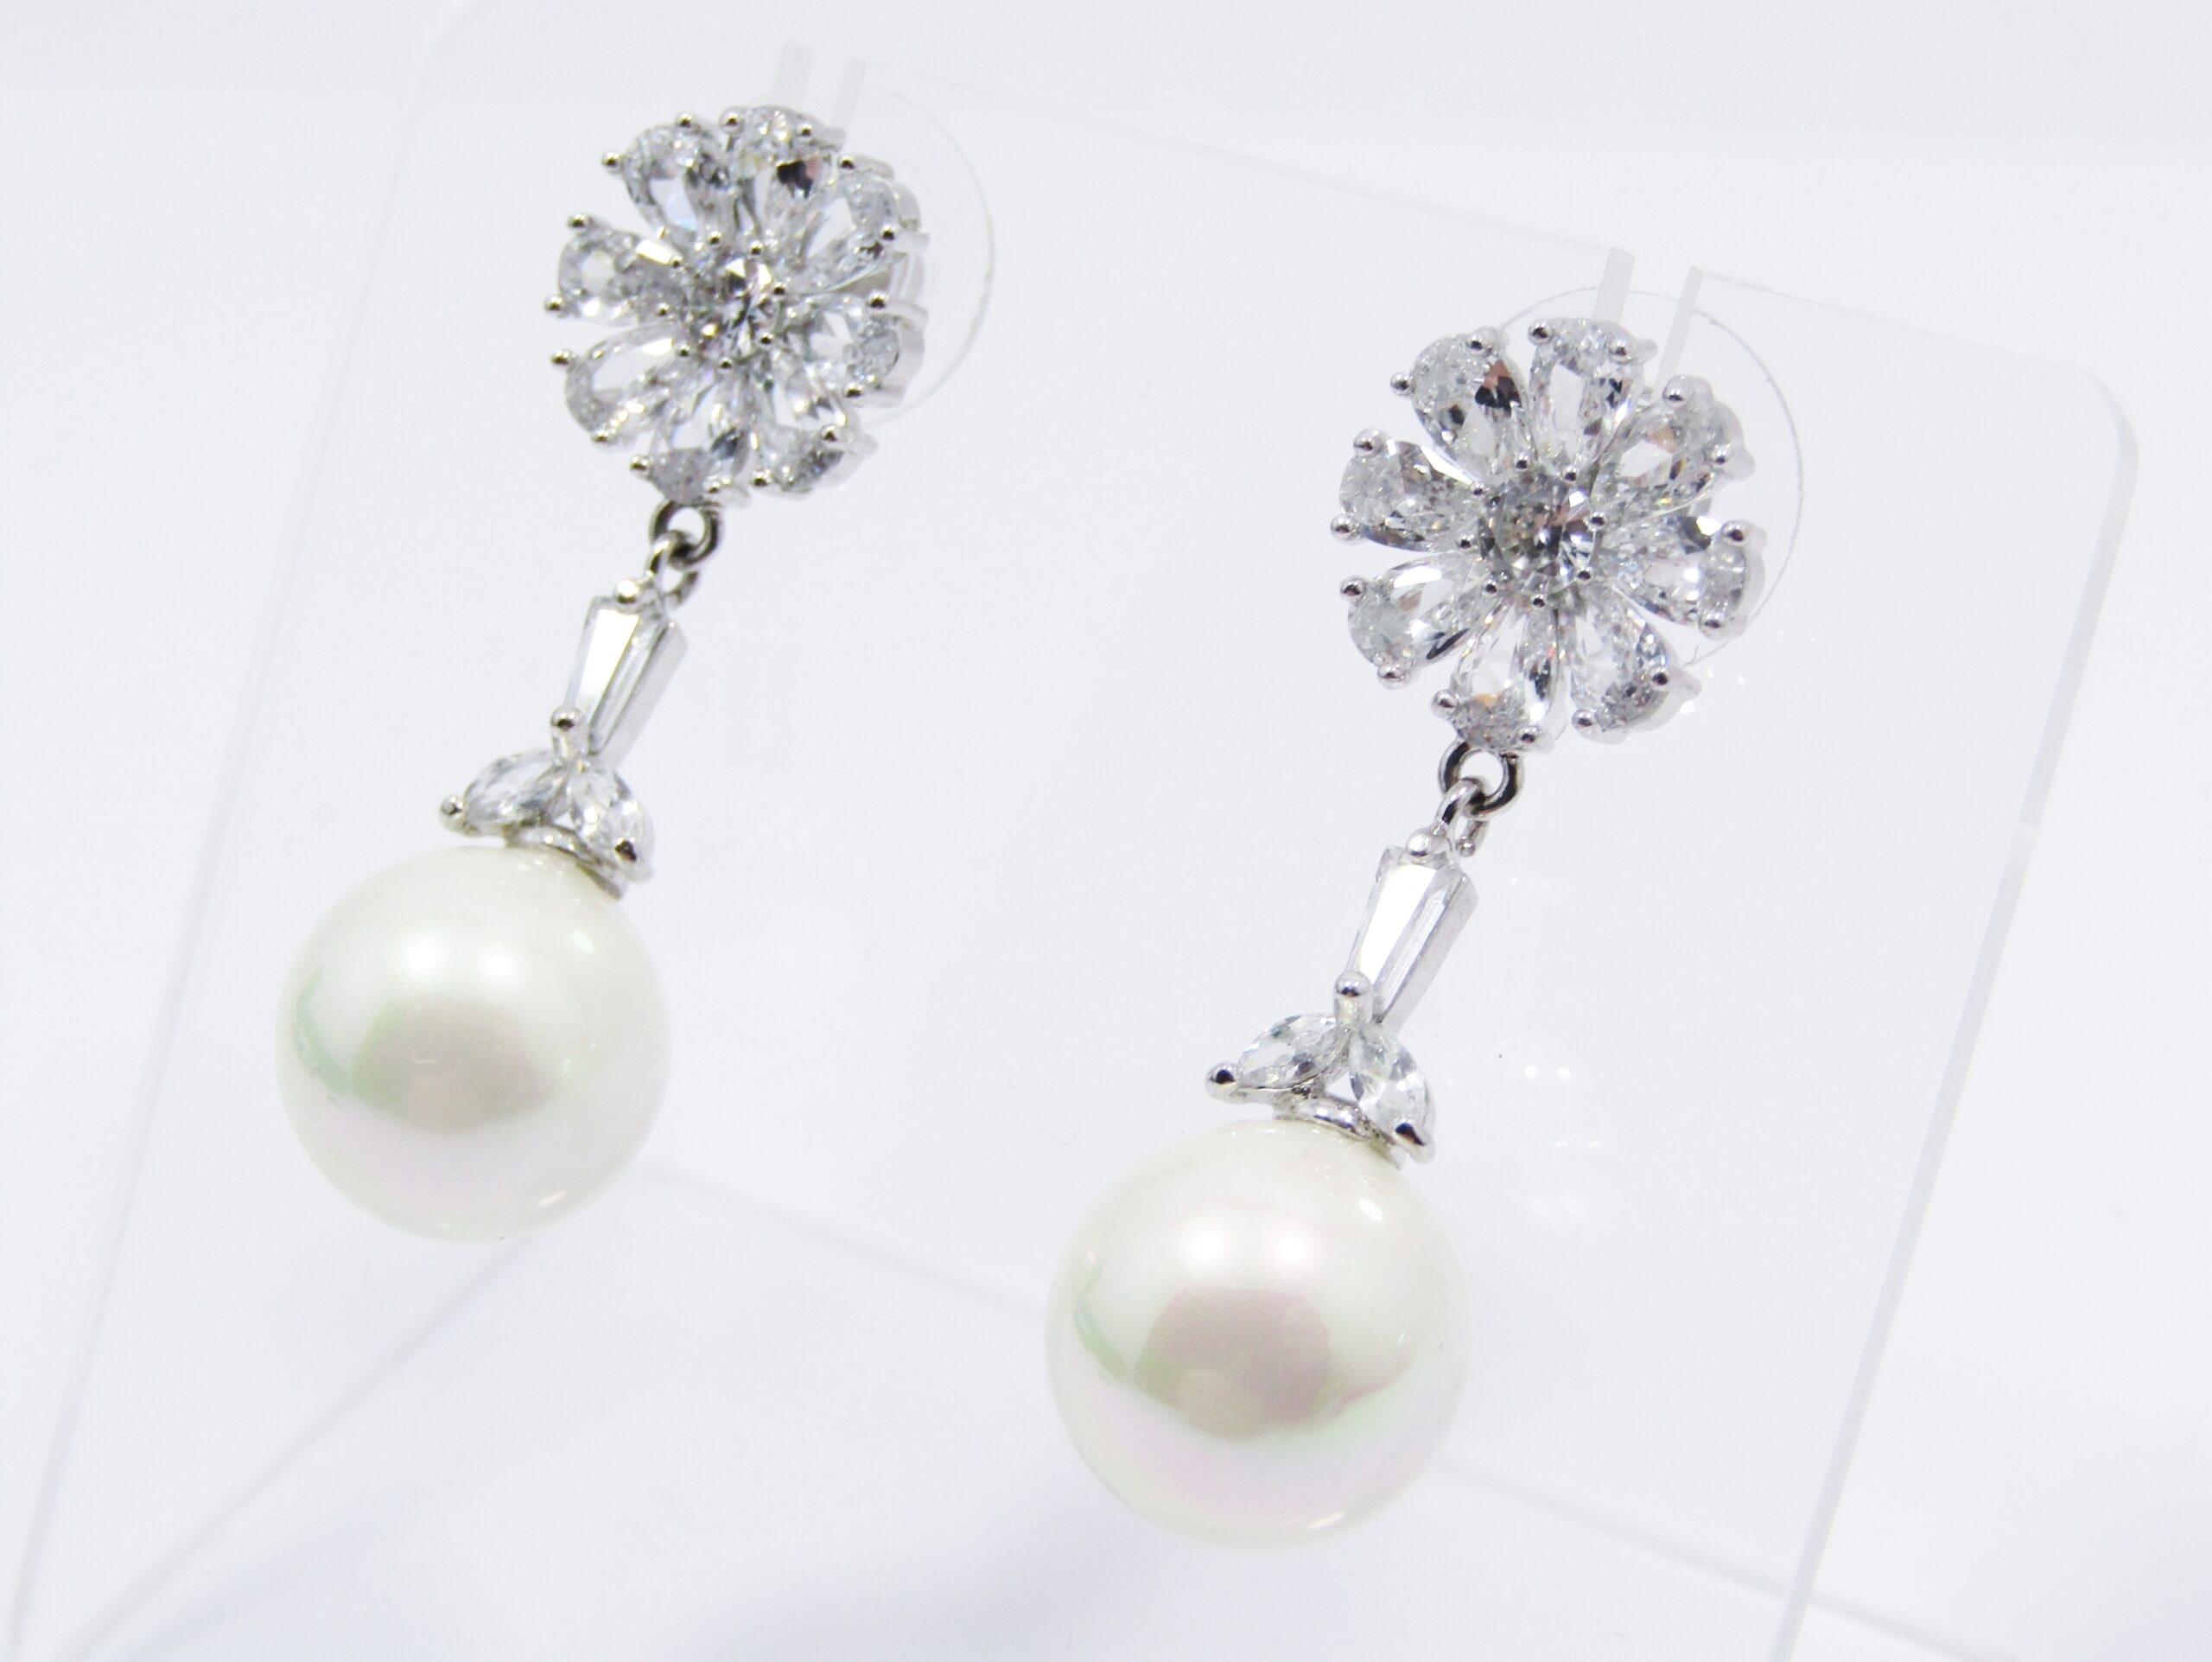 A Lovely Pair of Shell Pearl Dangling Earrings in a Silver Tone